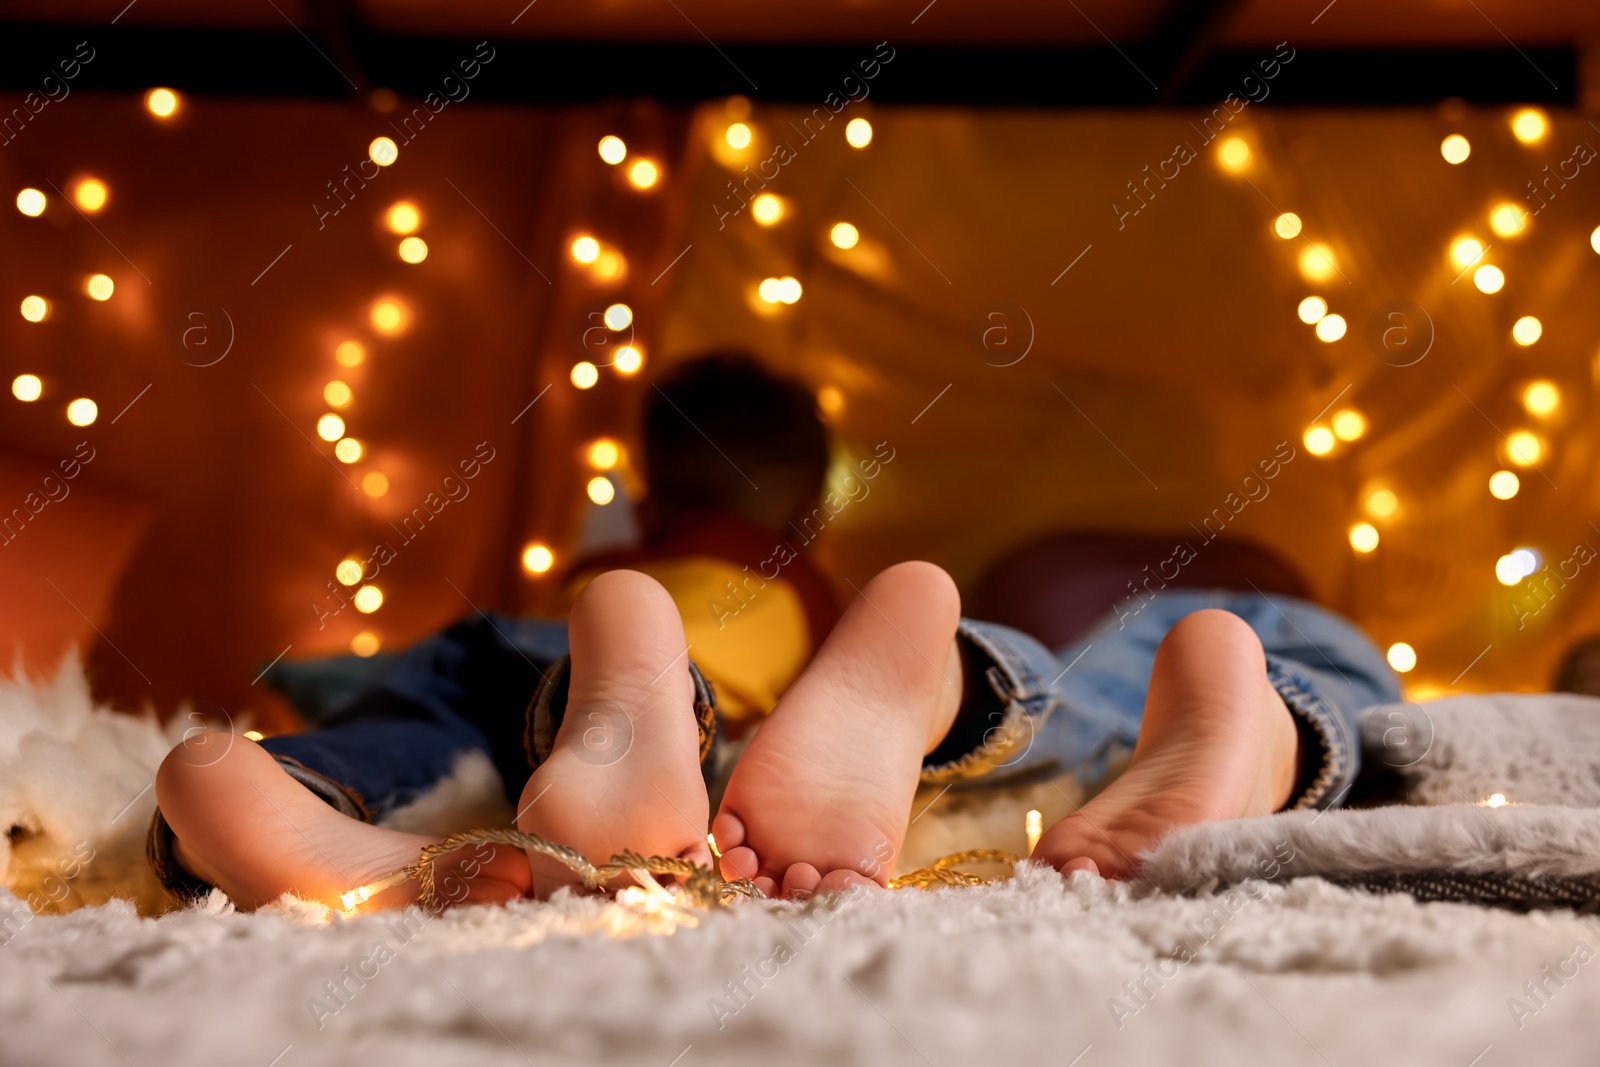 Photo of Kids in decorated play tent at home, focus on feet